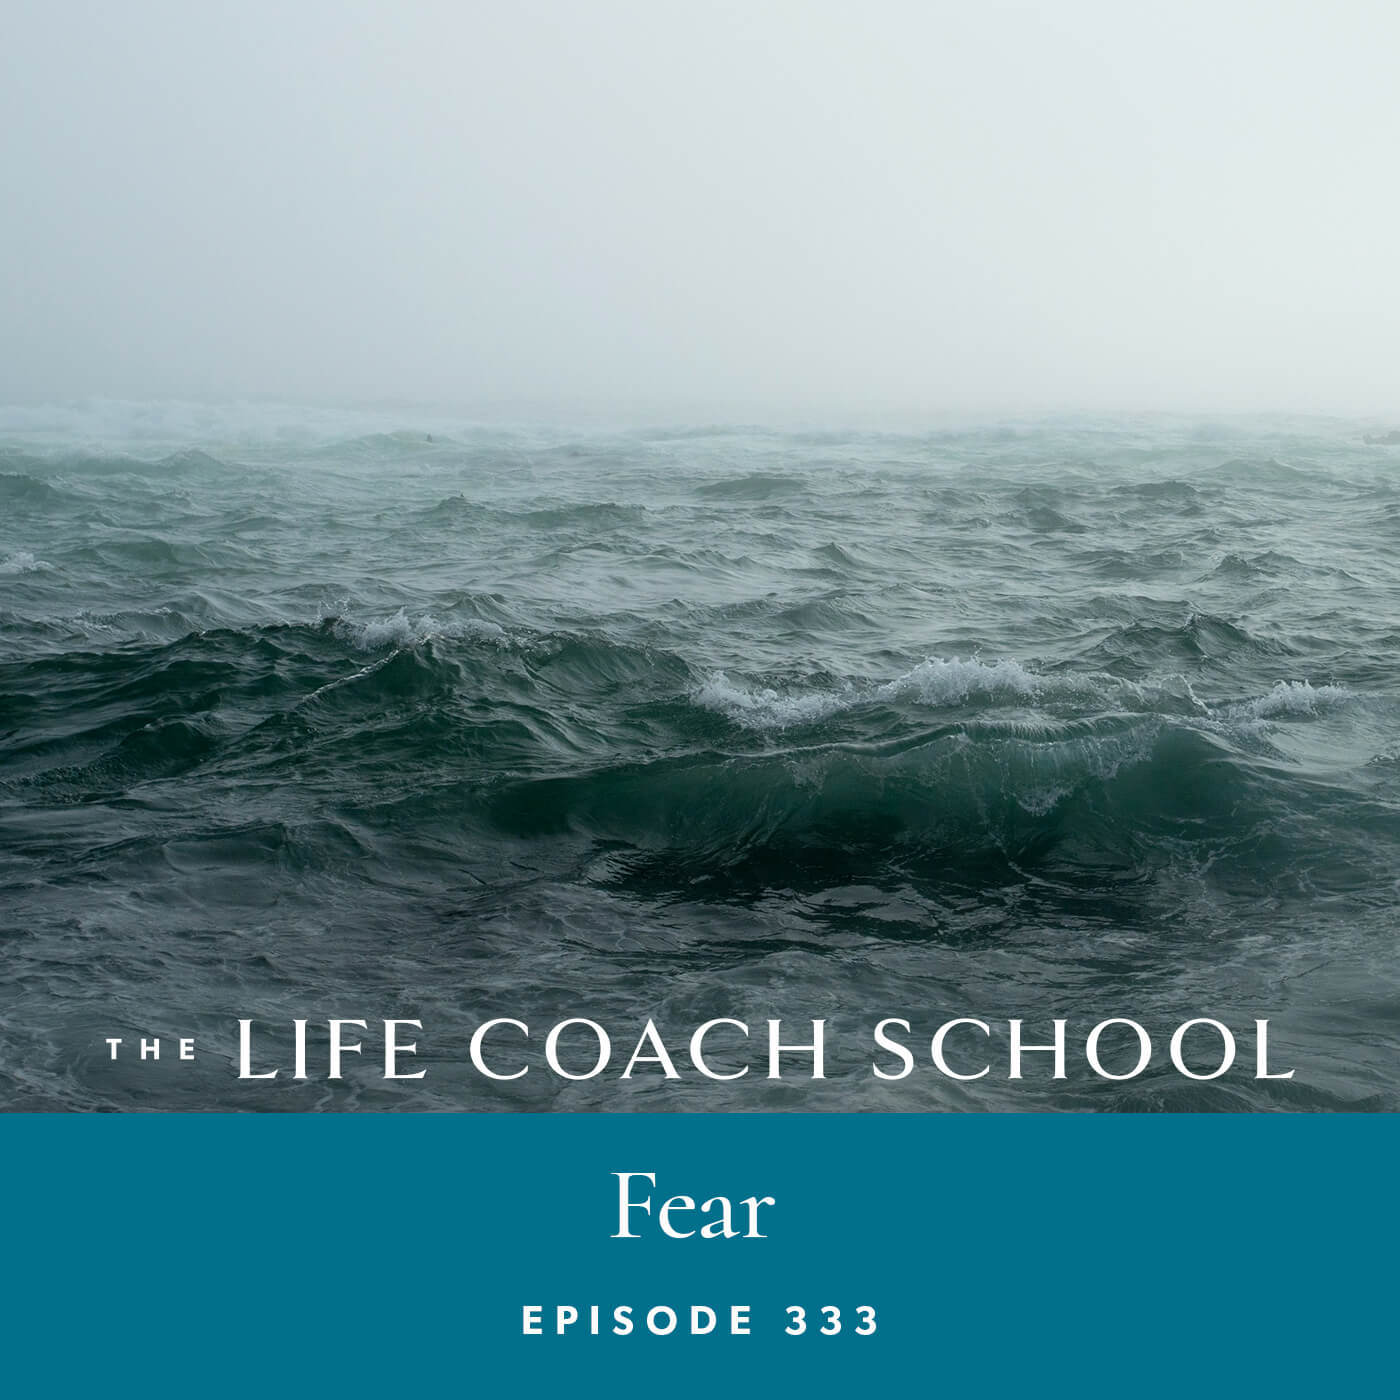 The Life Coach School Podcast with Brooke Castillo | Episode 333 | Fear